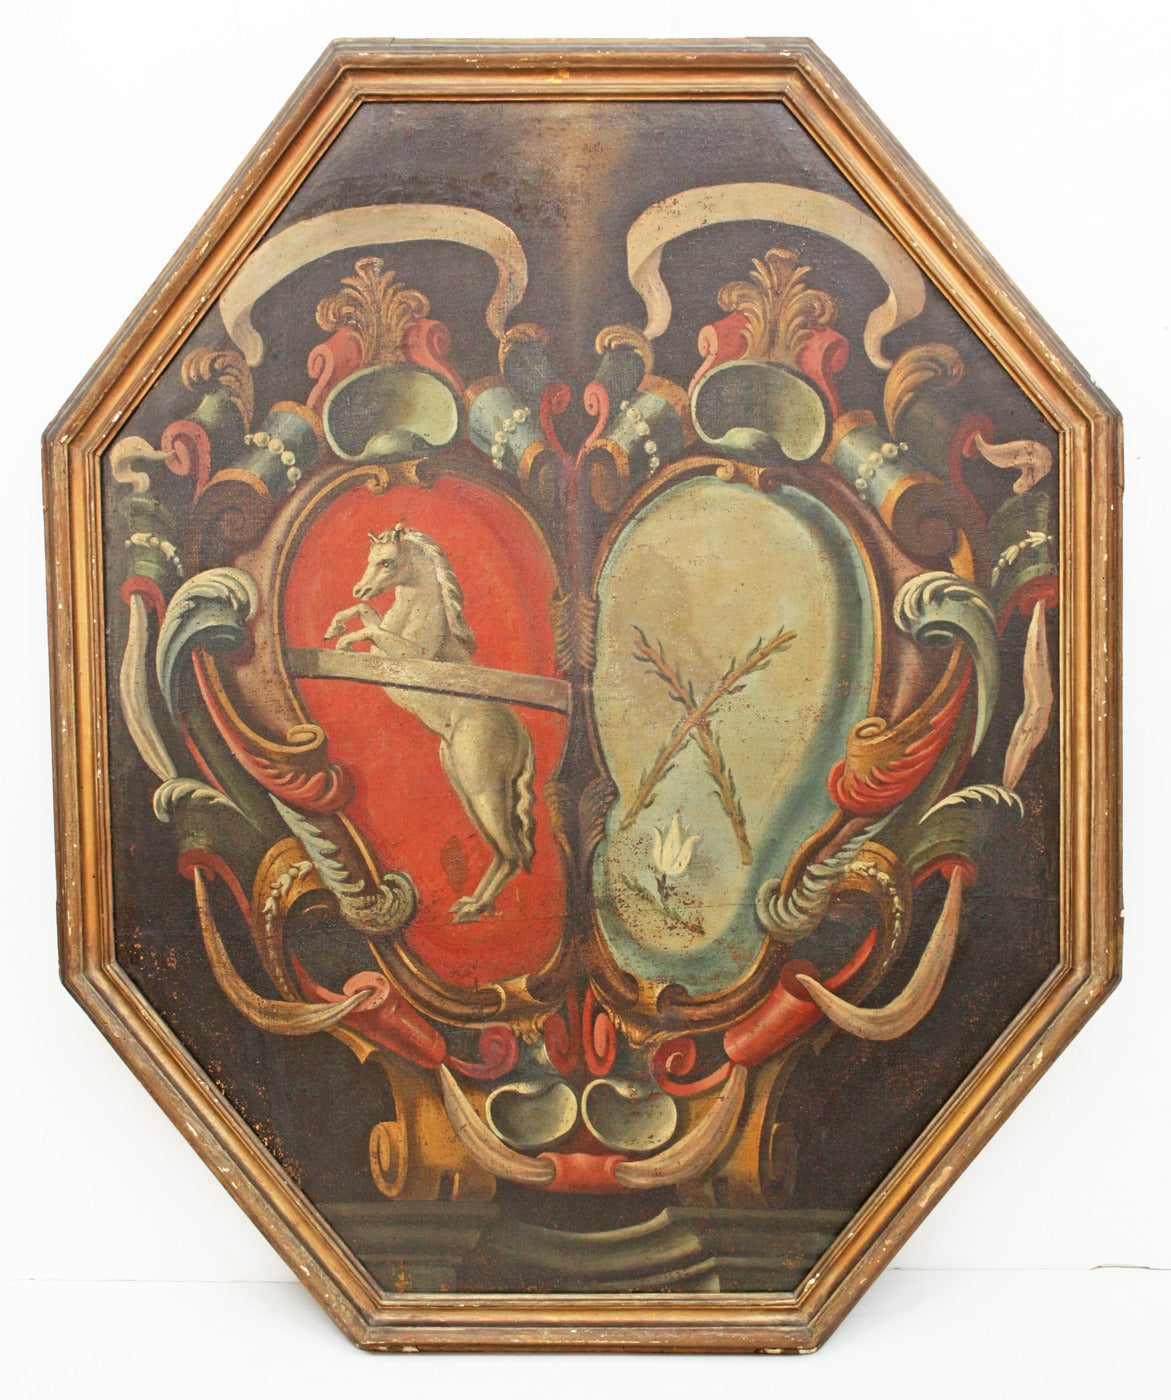 a large octagonal heraldic / armorial piece, oil on canvas, gilt frame, continental, perhaps France or Germany